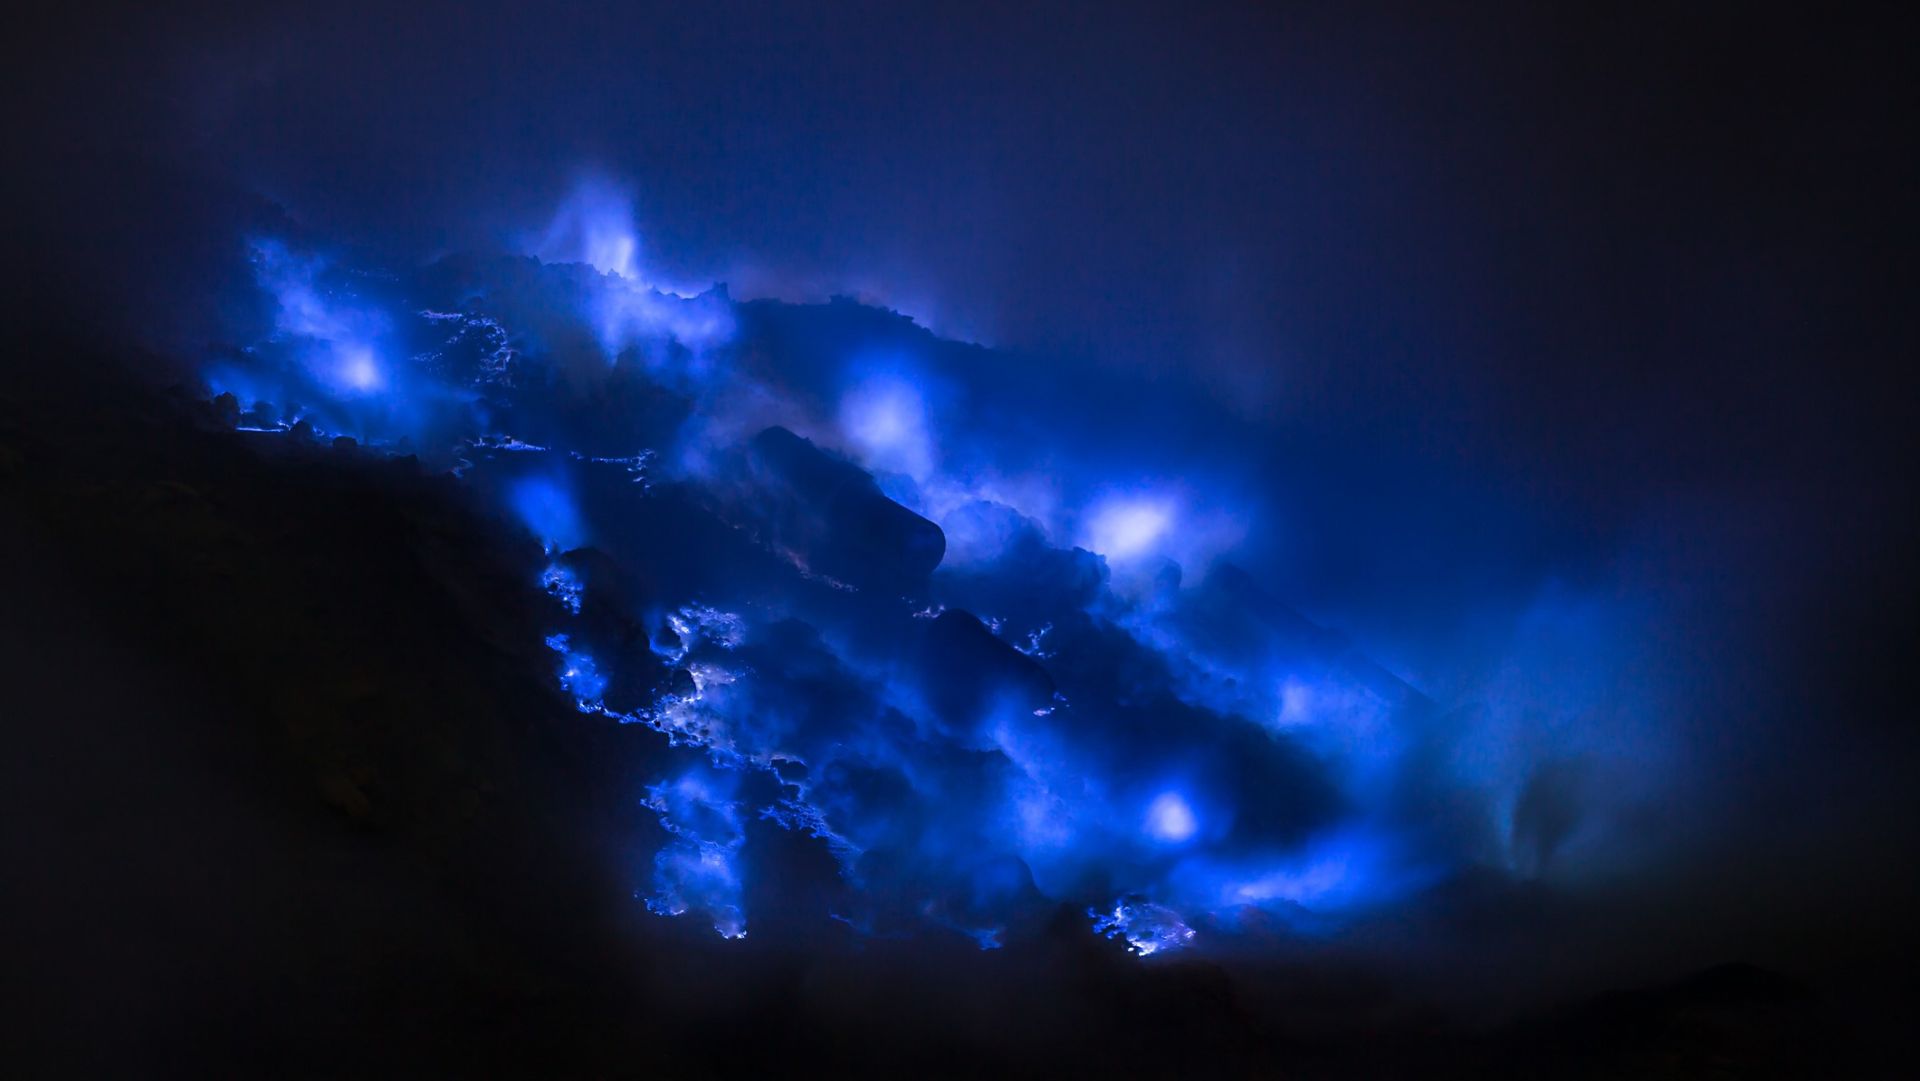 <p>                     The electric-blue rivers ejected from Kawah Ijen volcano in eastern Java look like something from another world.                   </p>                                      <p>                     Contrary to what is commonly reported, the lava itself is not blue. The striking color is a result of volcanic sulfur emissions. According to Geology.com), the volcano emits sulfurous gases that ignite when they meet Earth's oxygen-rich atmosphere and burn with a rich blue flame. When the sulfurous gas condenses, it produces the infamous blue rivers that illuminate the volcanic landscape at night.                    </p>                                      <p>                     According to Smithsonian Magazine, the eerie blue glow is only visible at night because it's the flames that are blue rather than the lava itself. It looks like any other volcano during the daytime.                   </p>